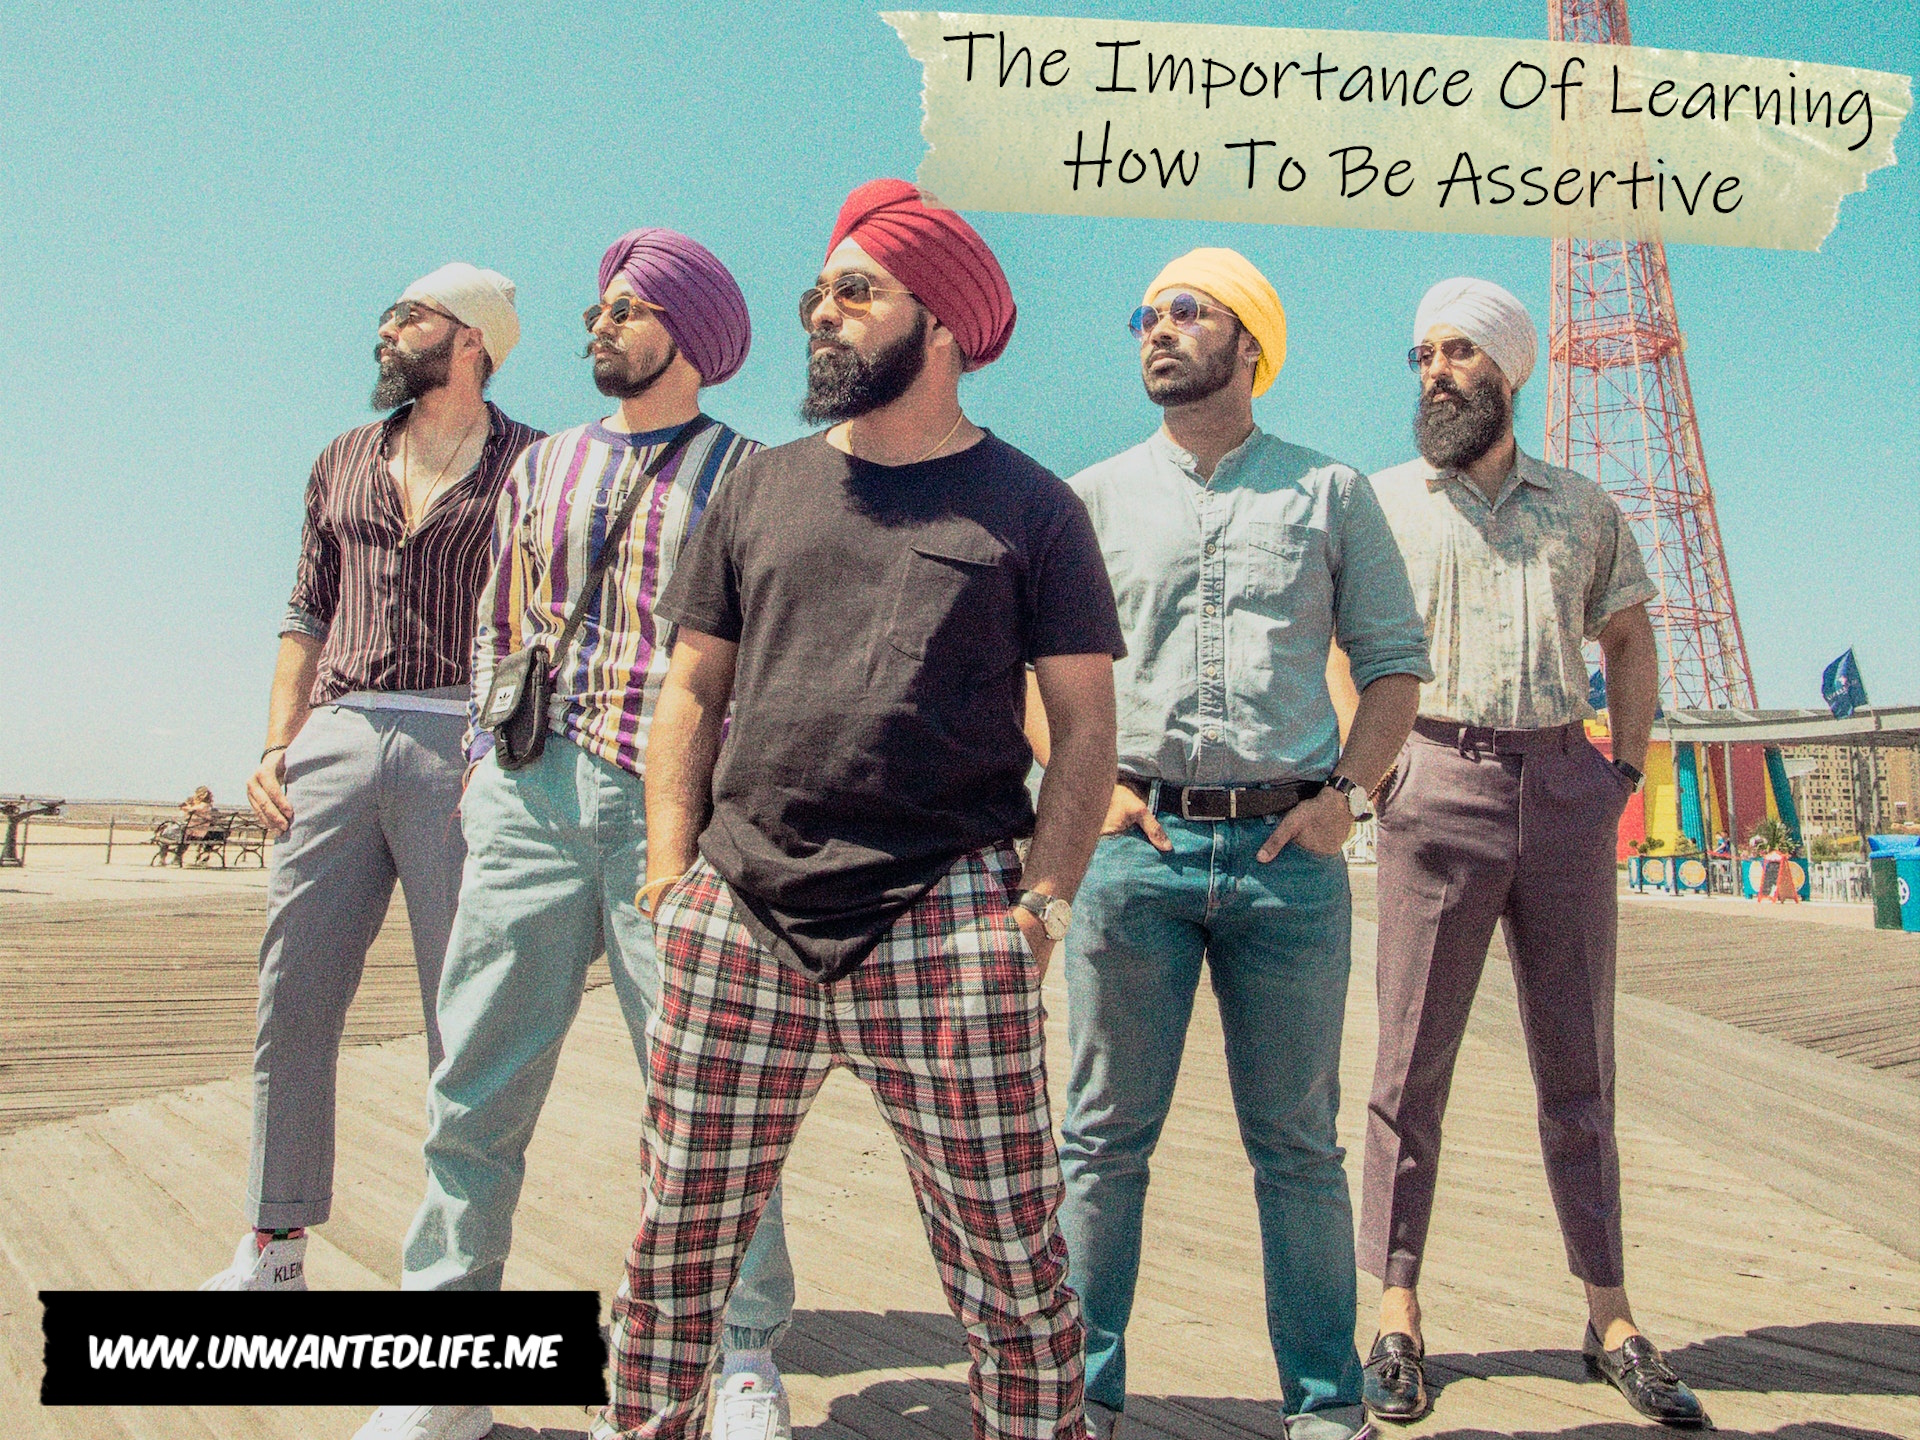 A group photo of five Sikh men looking smart and posing - The Importance Of Learning How To Be Assertive